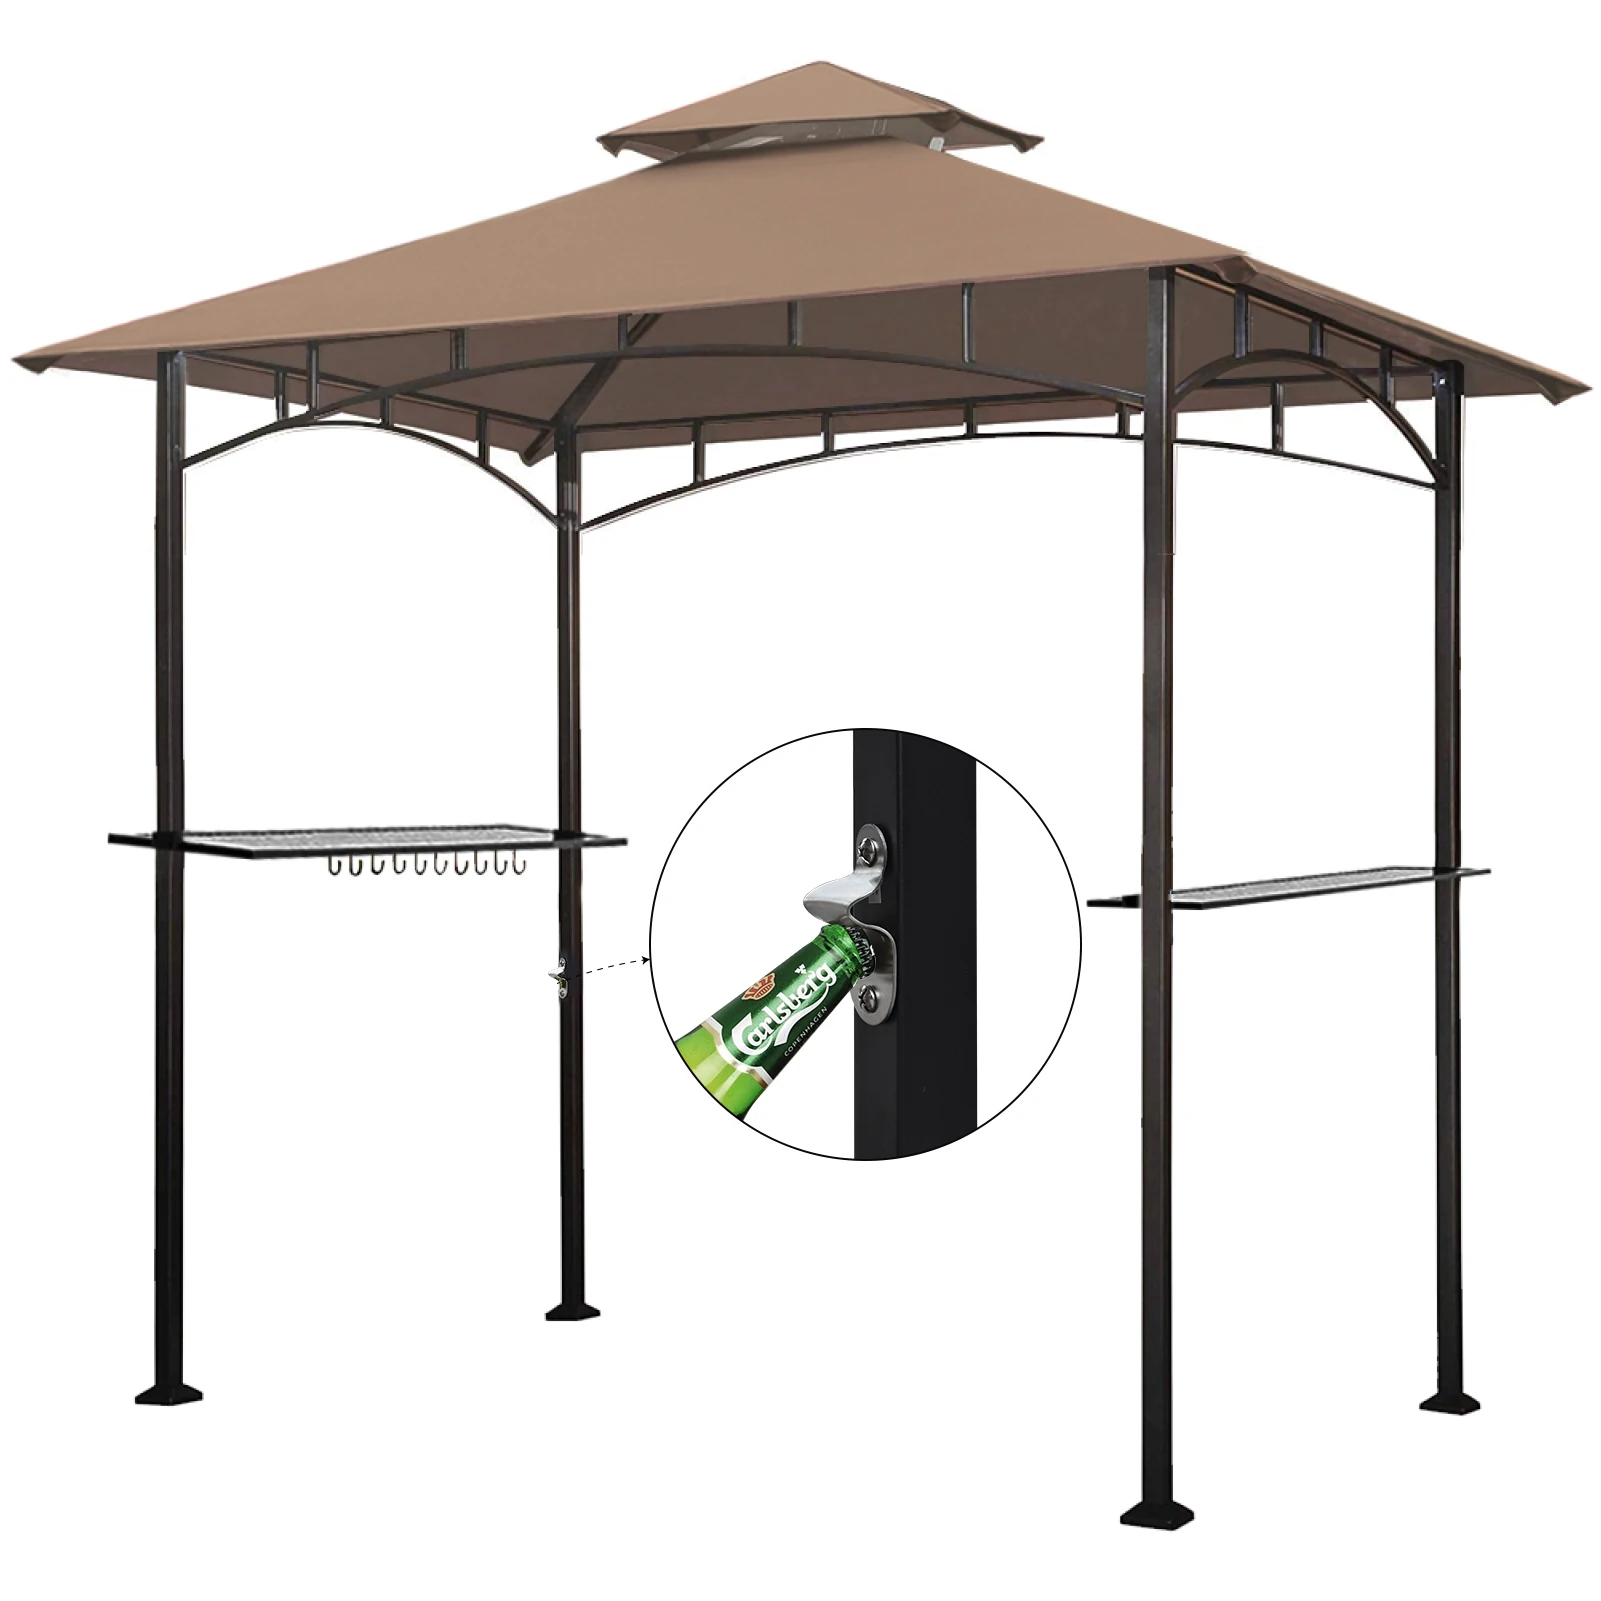 Eurmax 5x8 Bbq Grill Gazebo Shelter Awning For Patio And Outdoor Backyard Double Tier Soft Top Canopy Party With Led Lights Buy Bbq Gazebo